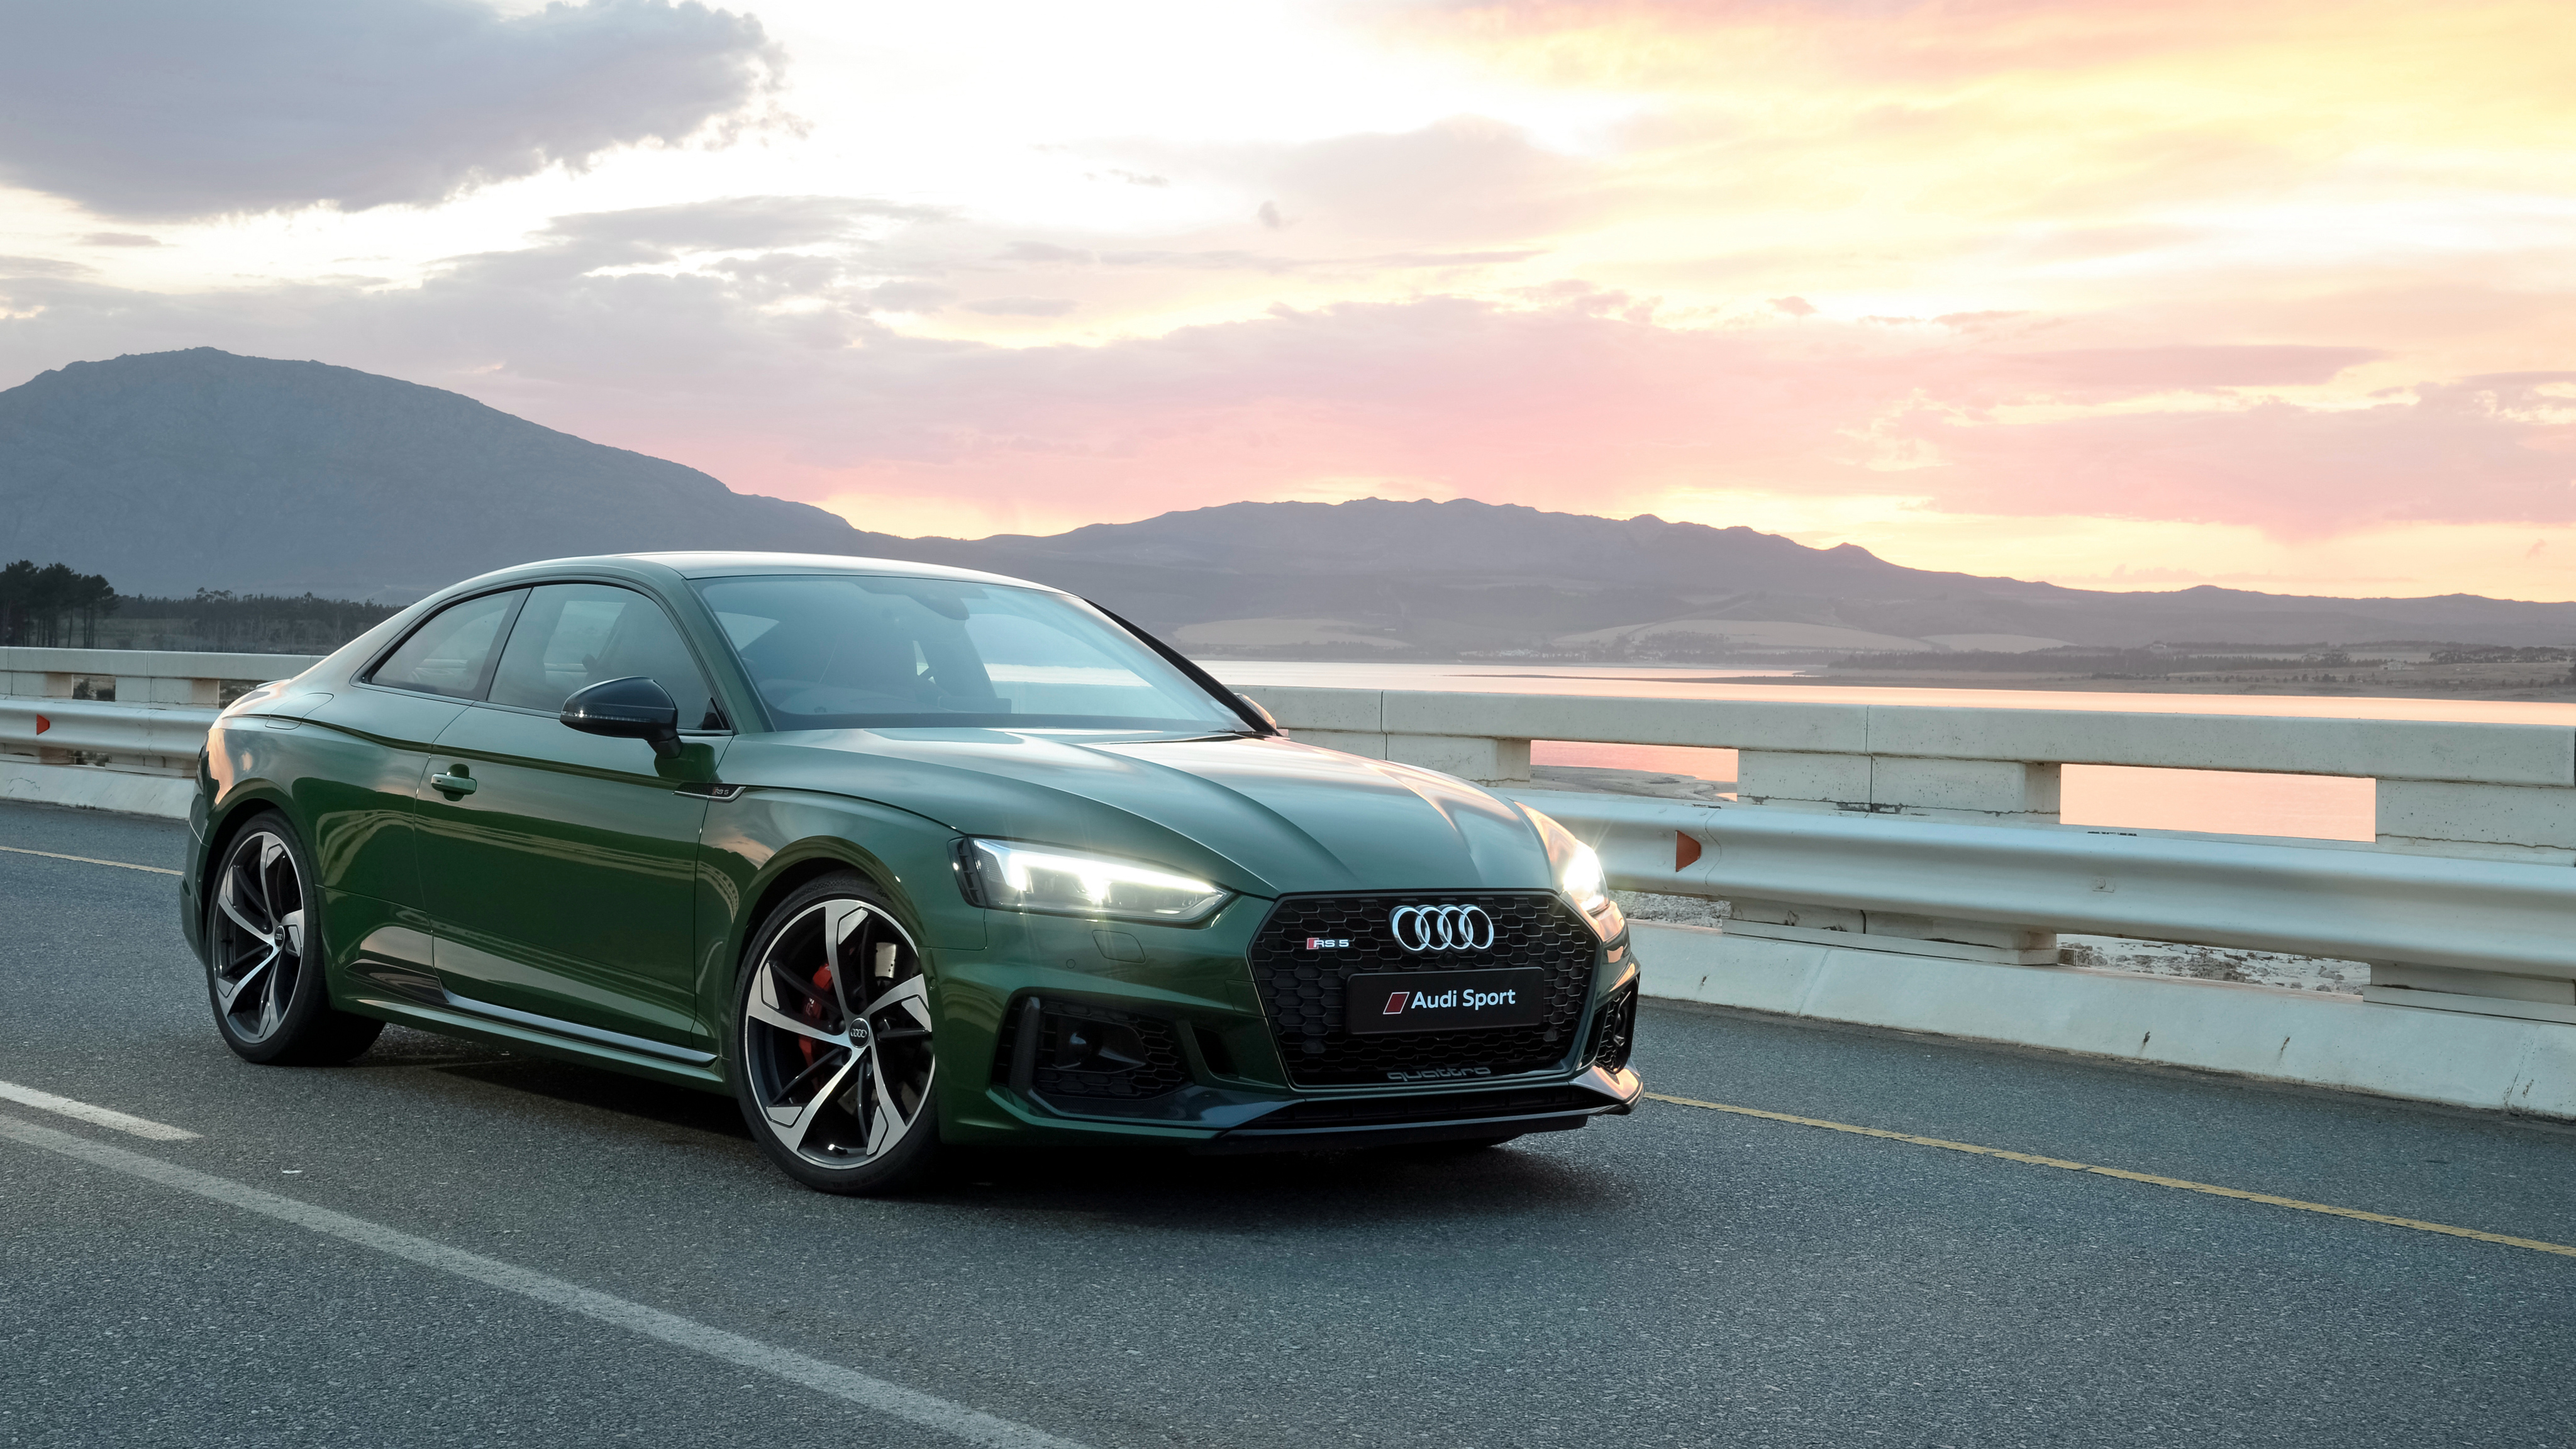 2018 Audi RS5 Coupe 4K Wallpaper HD Car Wallpapers 4096x2304